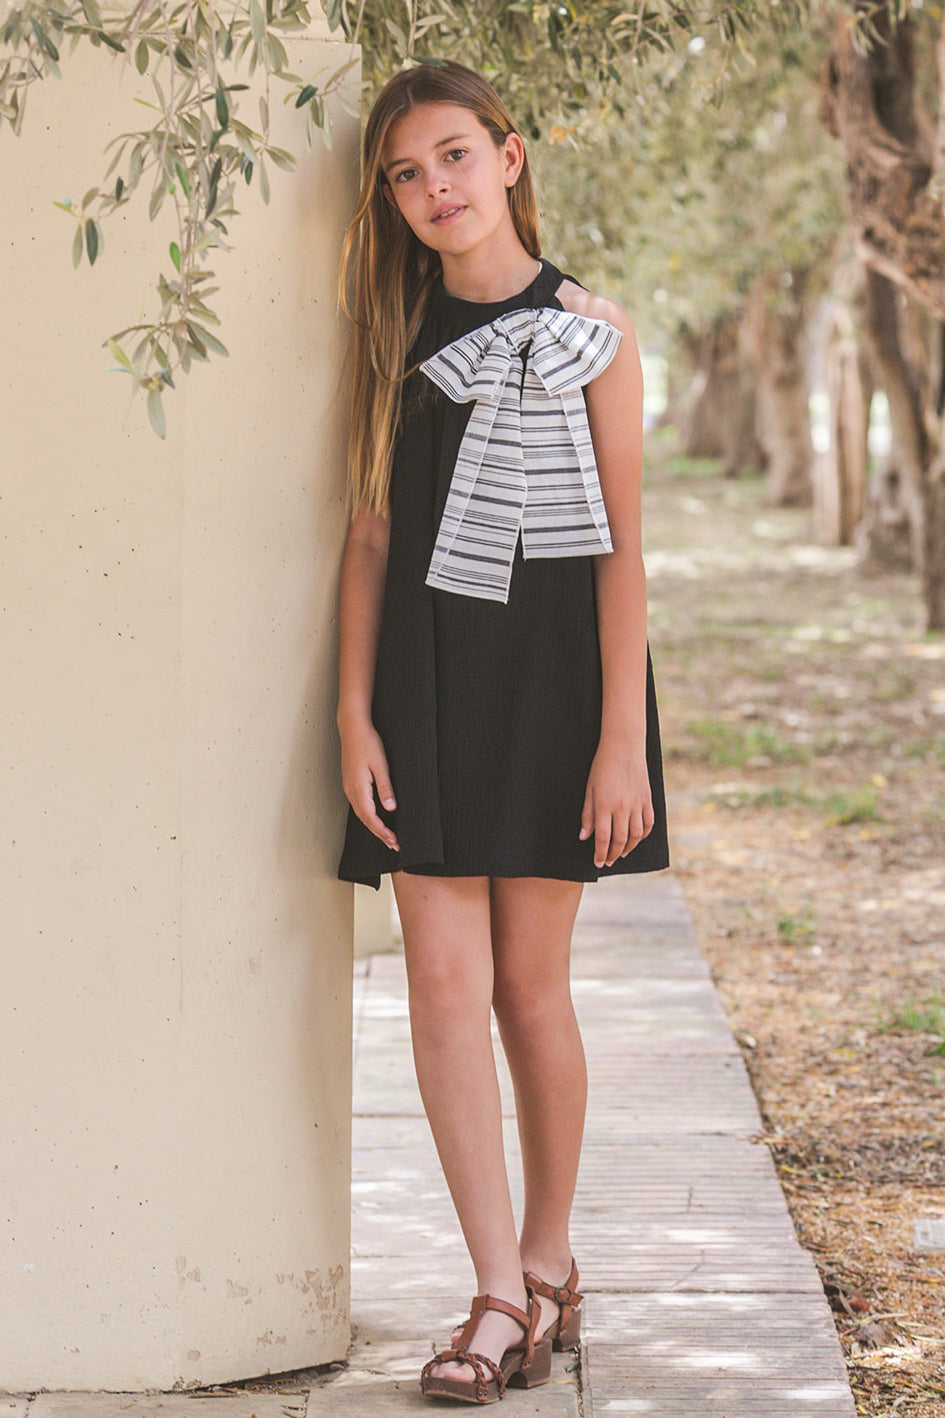 Eve Children "Verity" Black Cheesecloth Stripe Bow Dress | Millie and John